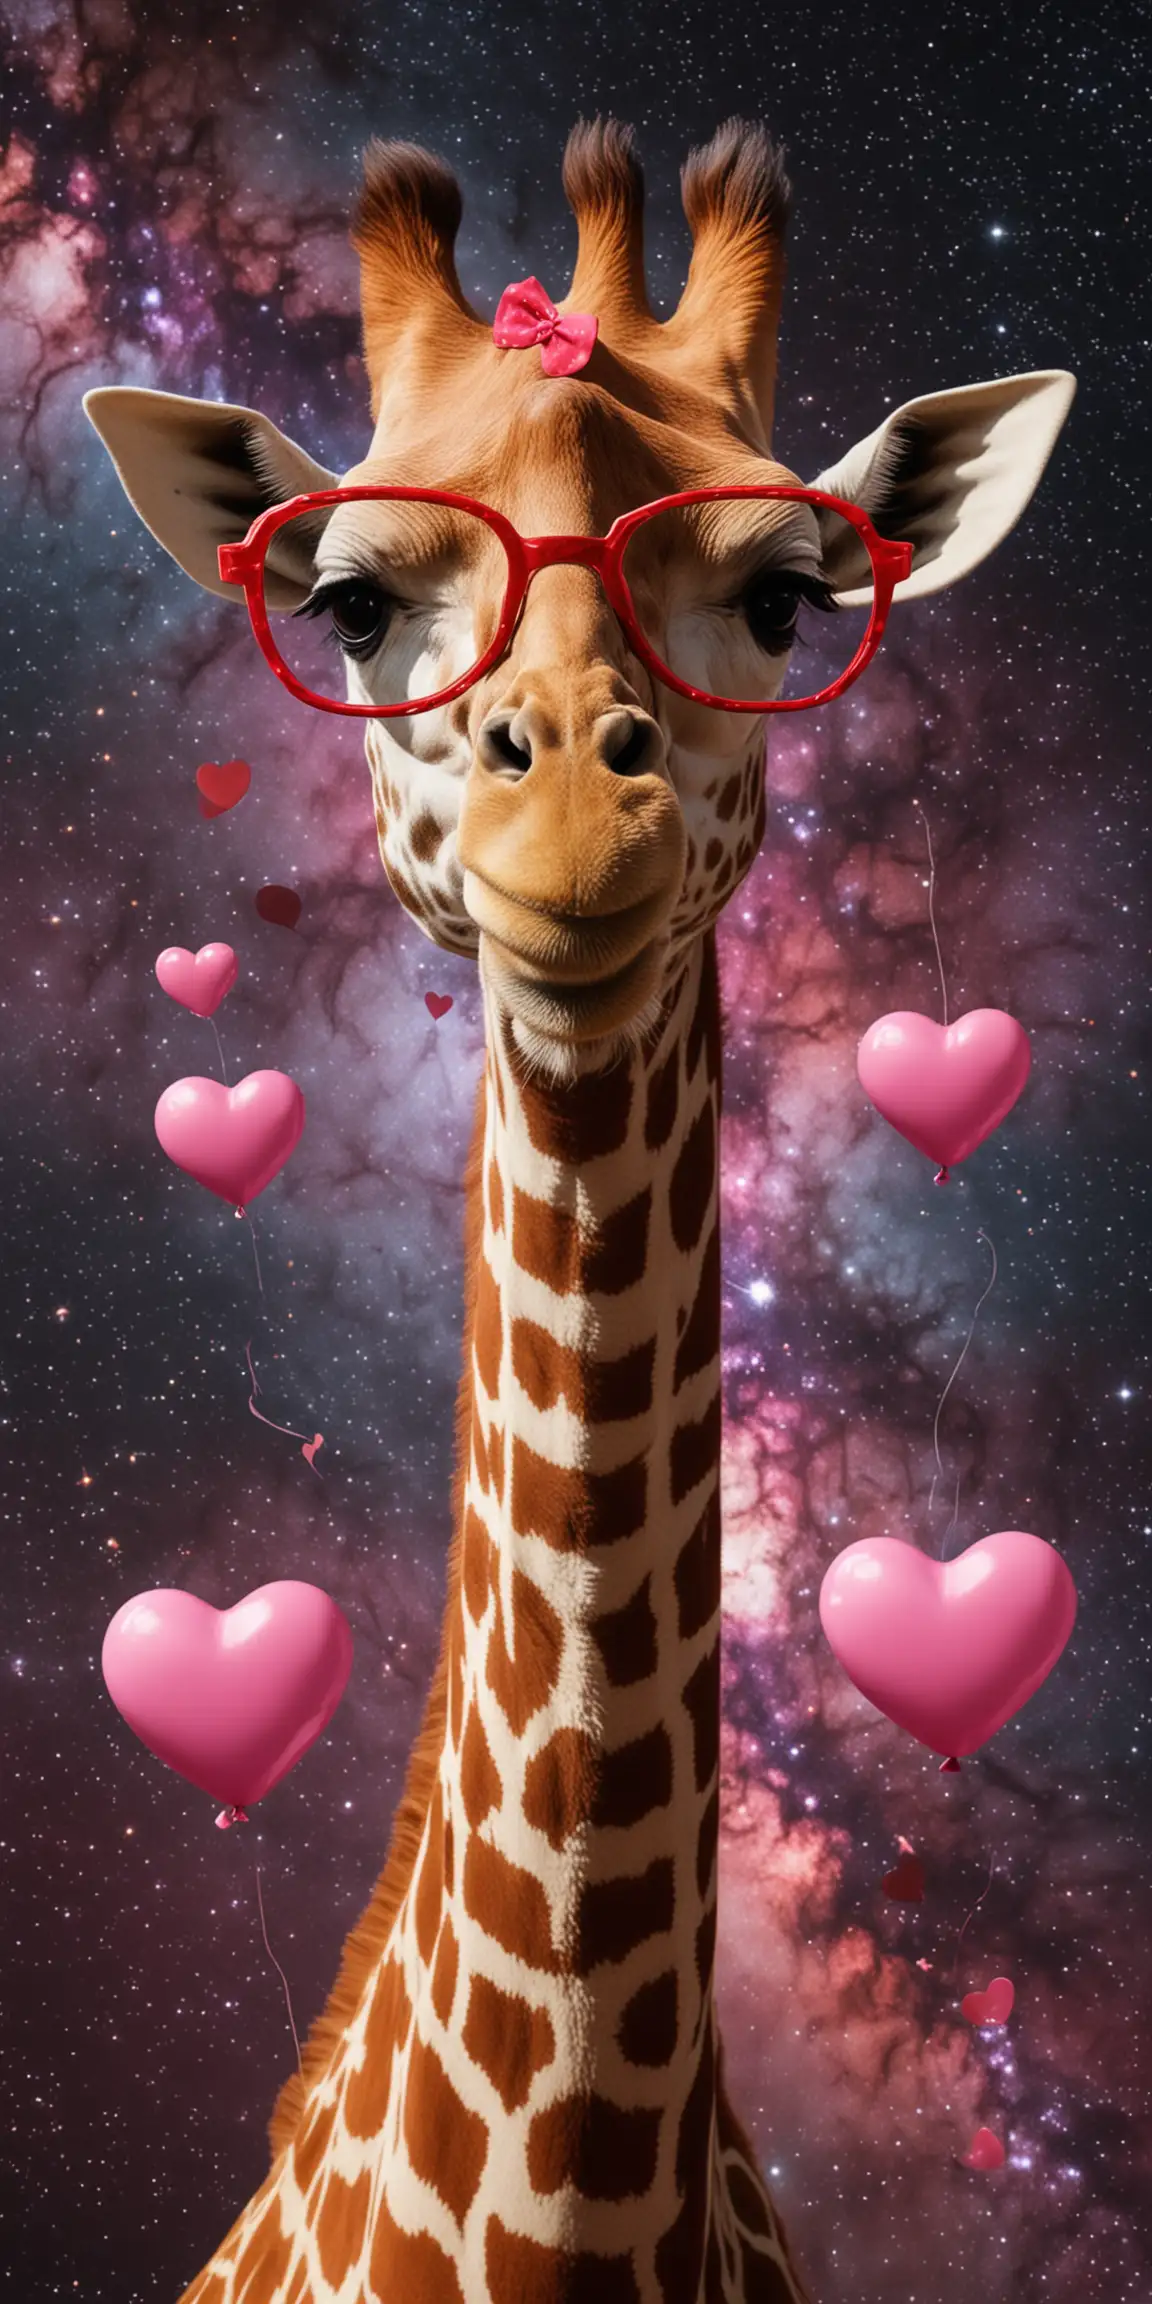 Giraffe Wearing Glasses Surrounded by Valentine Hearts in Space